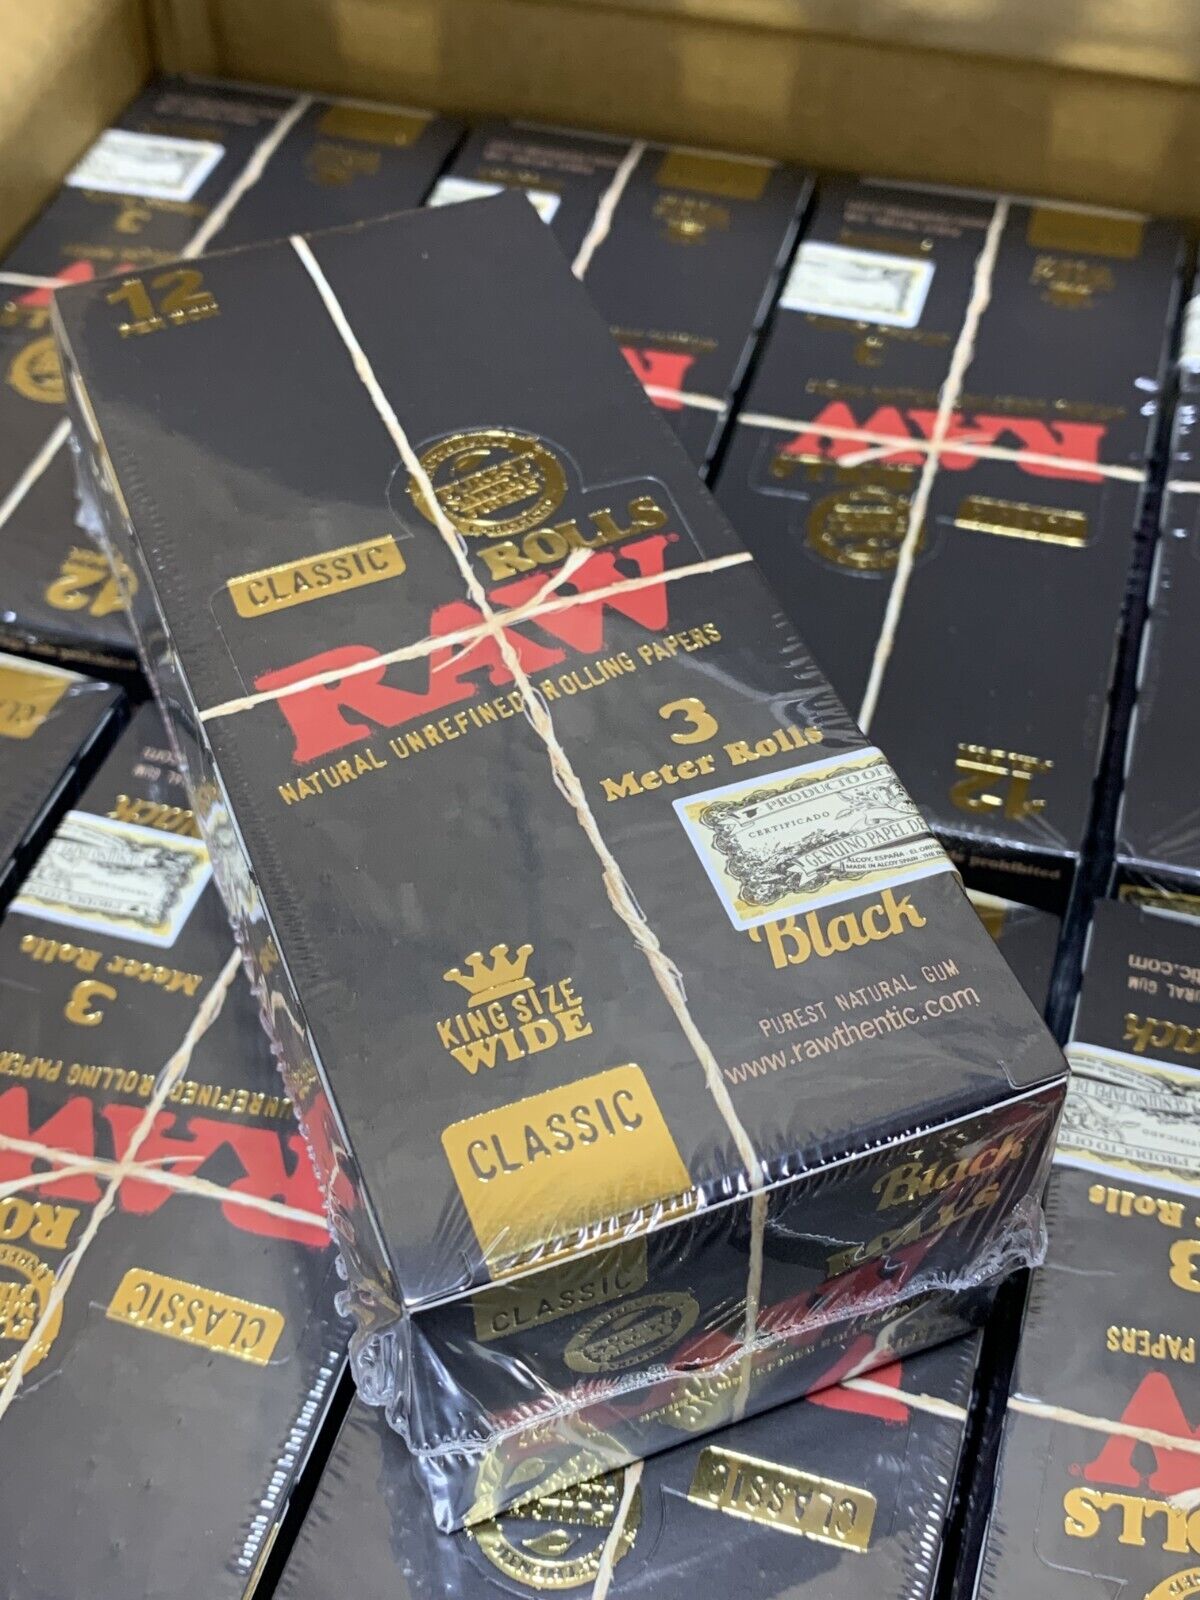 New FULL BOX of 12 ROLLS of RAW Black CLASSIC Rolling Paper KING SIZE WIDE